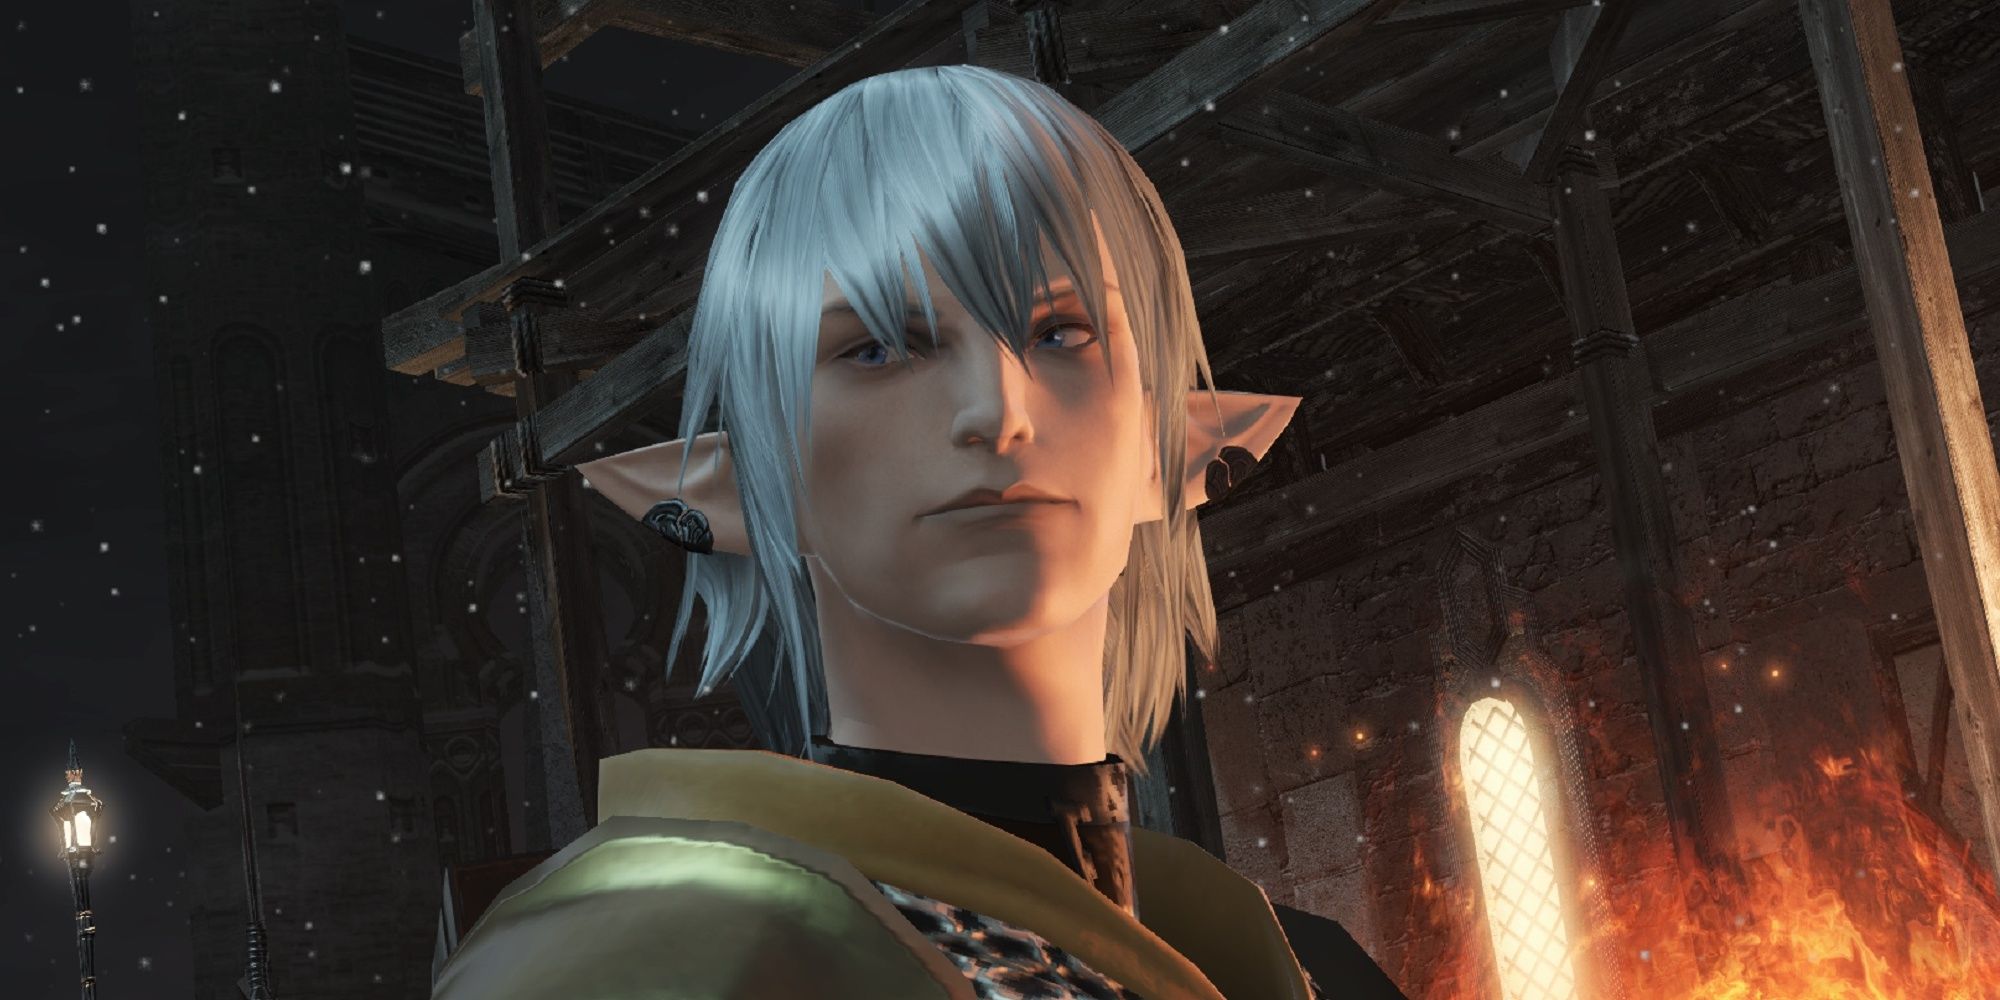 A headshot of the character Haurchefant with a bit of fire in background